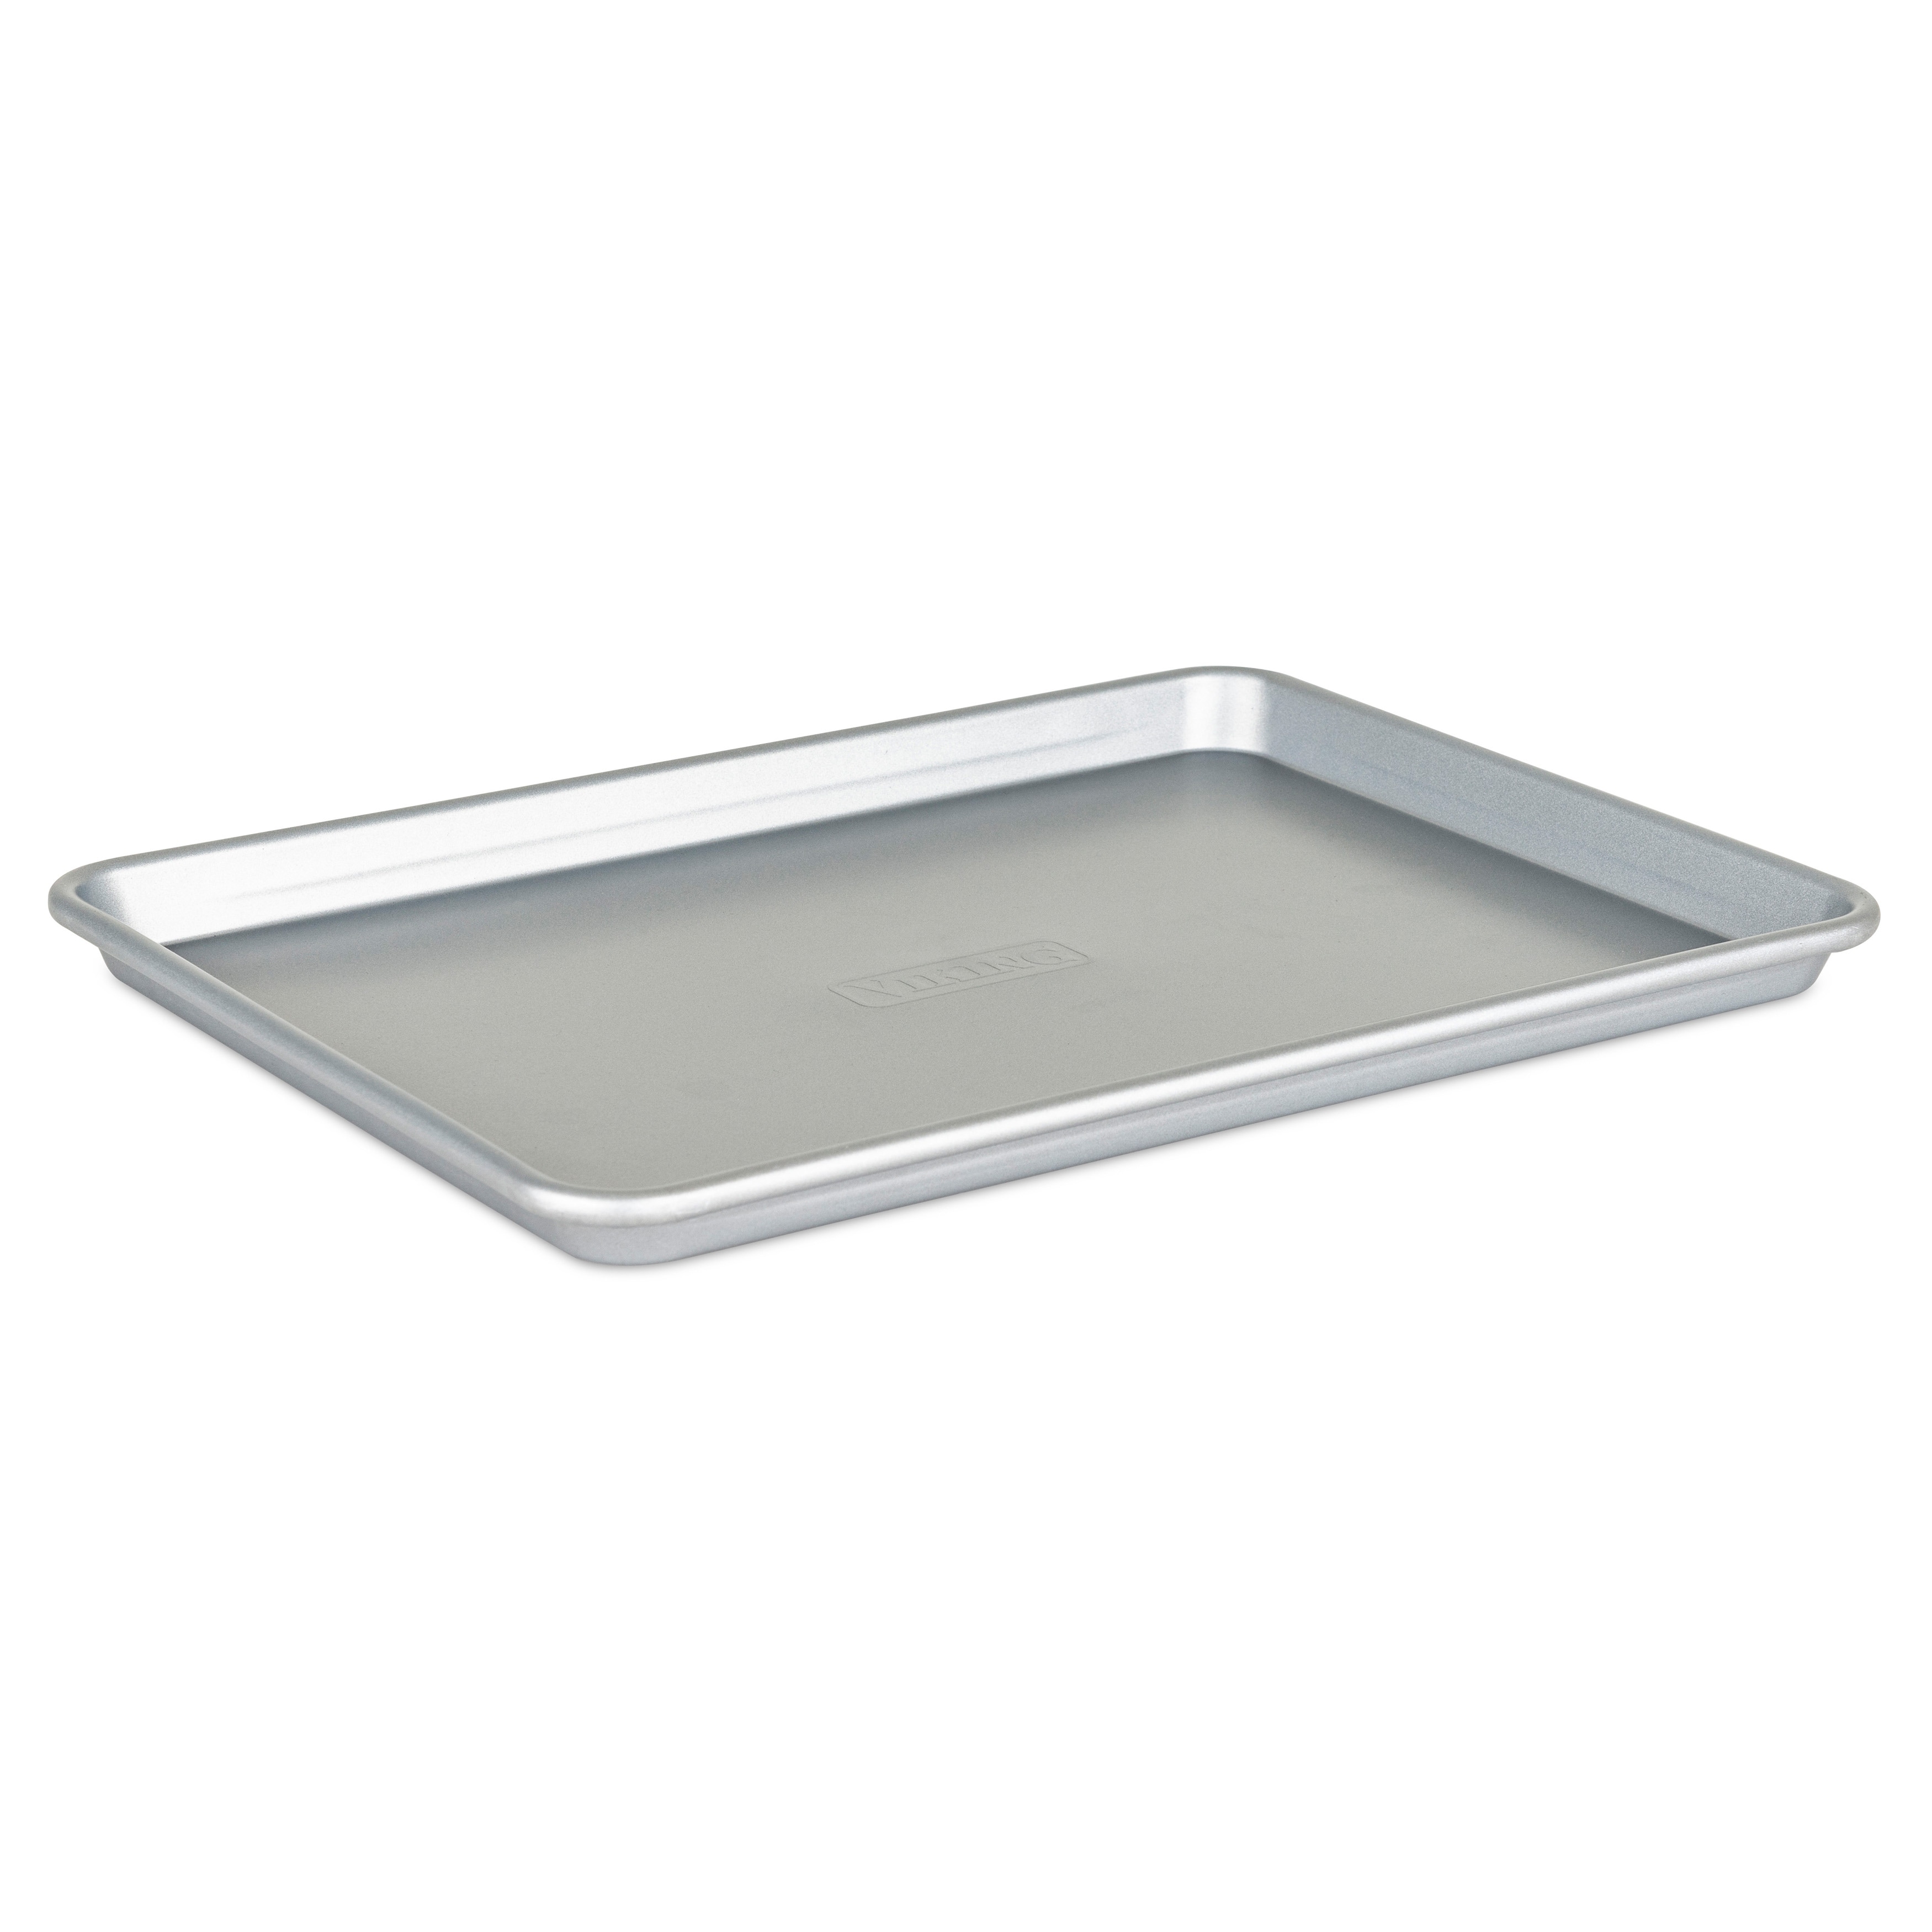 Nordic Ware Nonstick High-Sided Oven Crisp Baking Tray - Gold